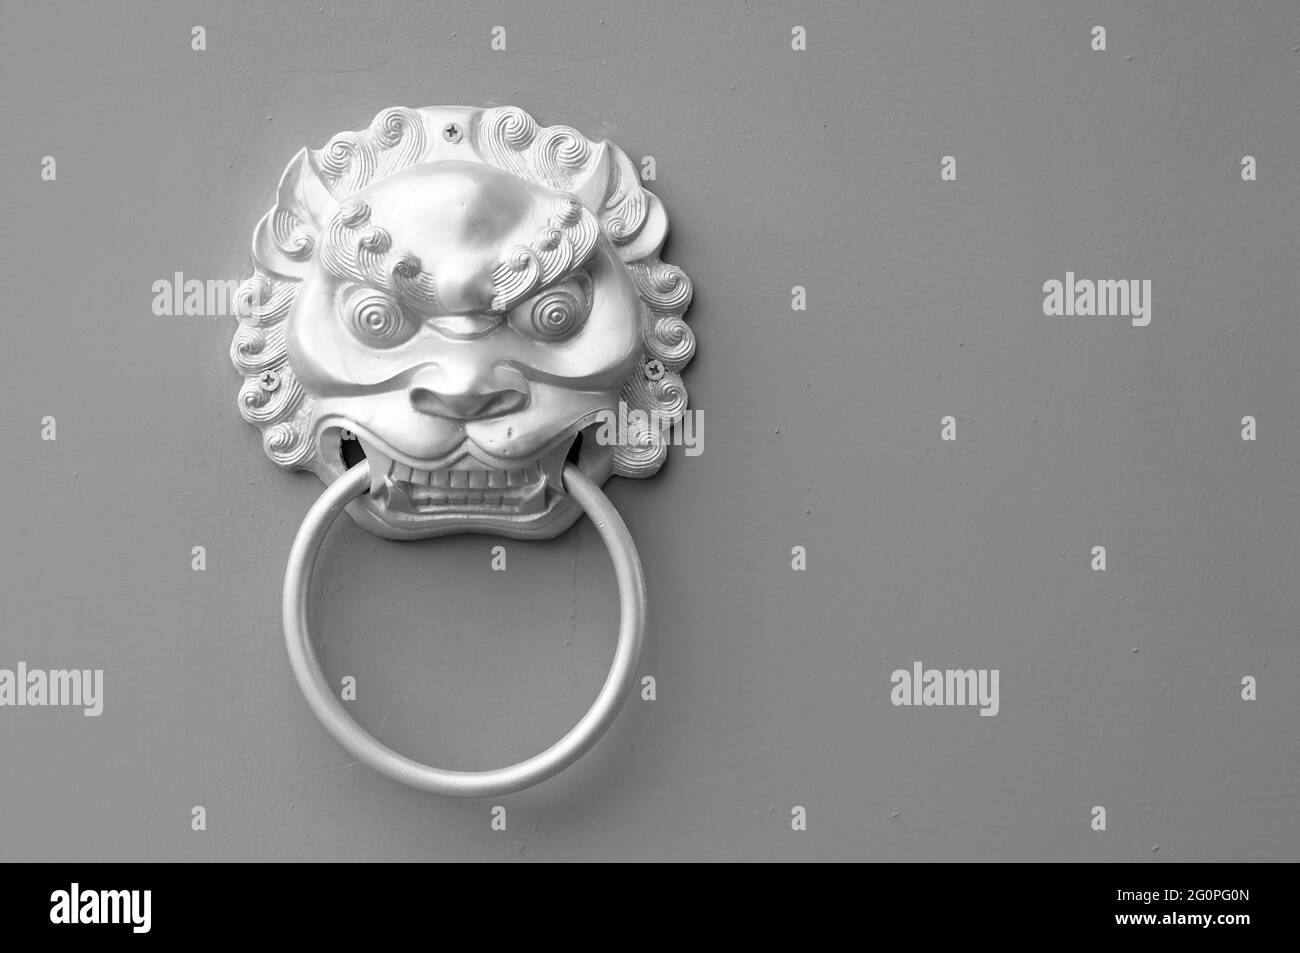 Traditional Chinese Door Knocker (in monochrome) Stock Photo